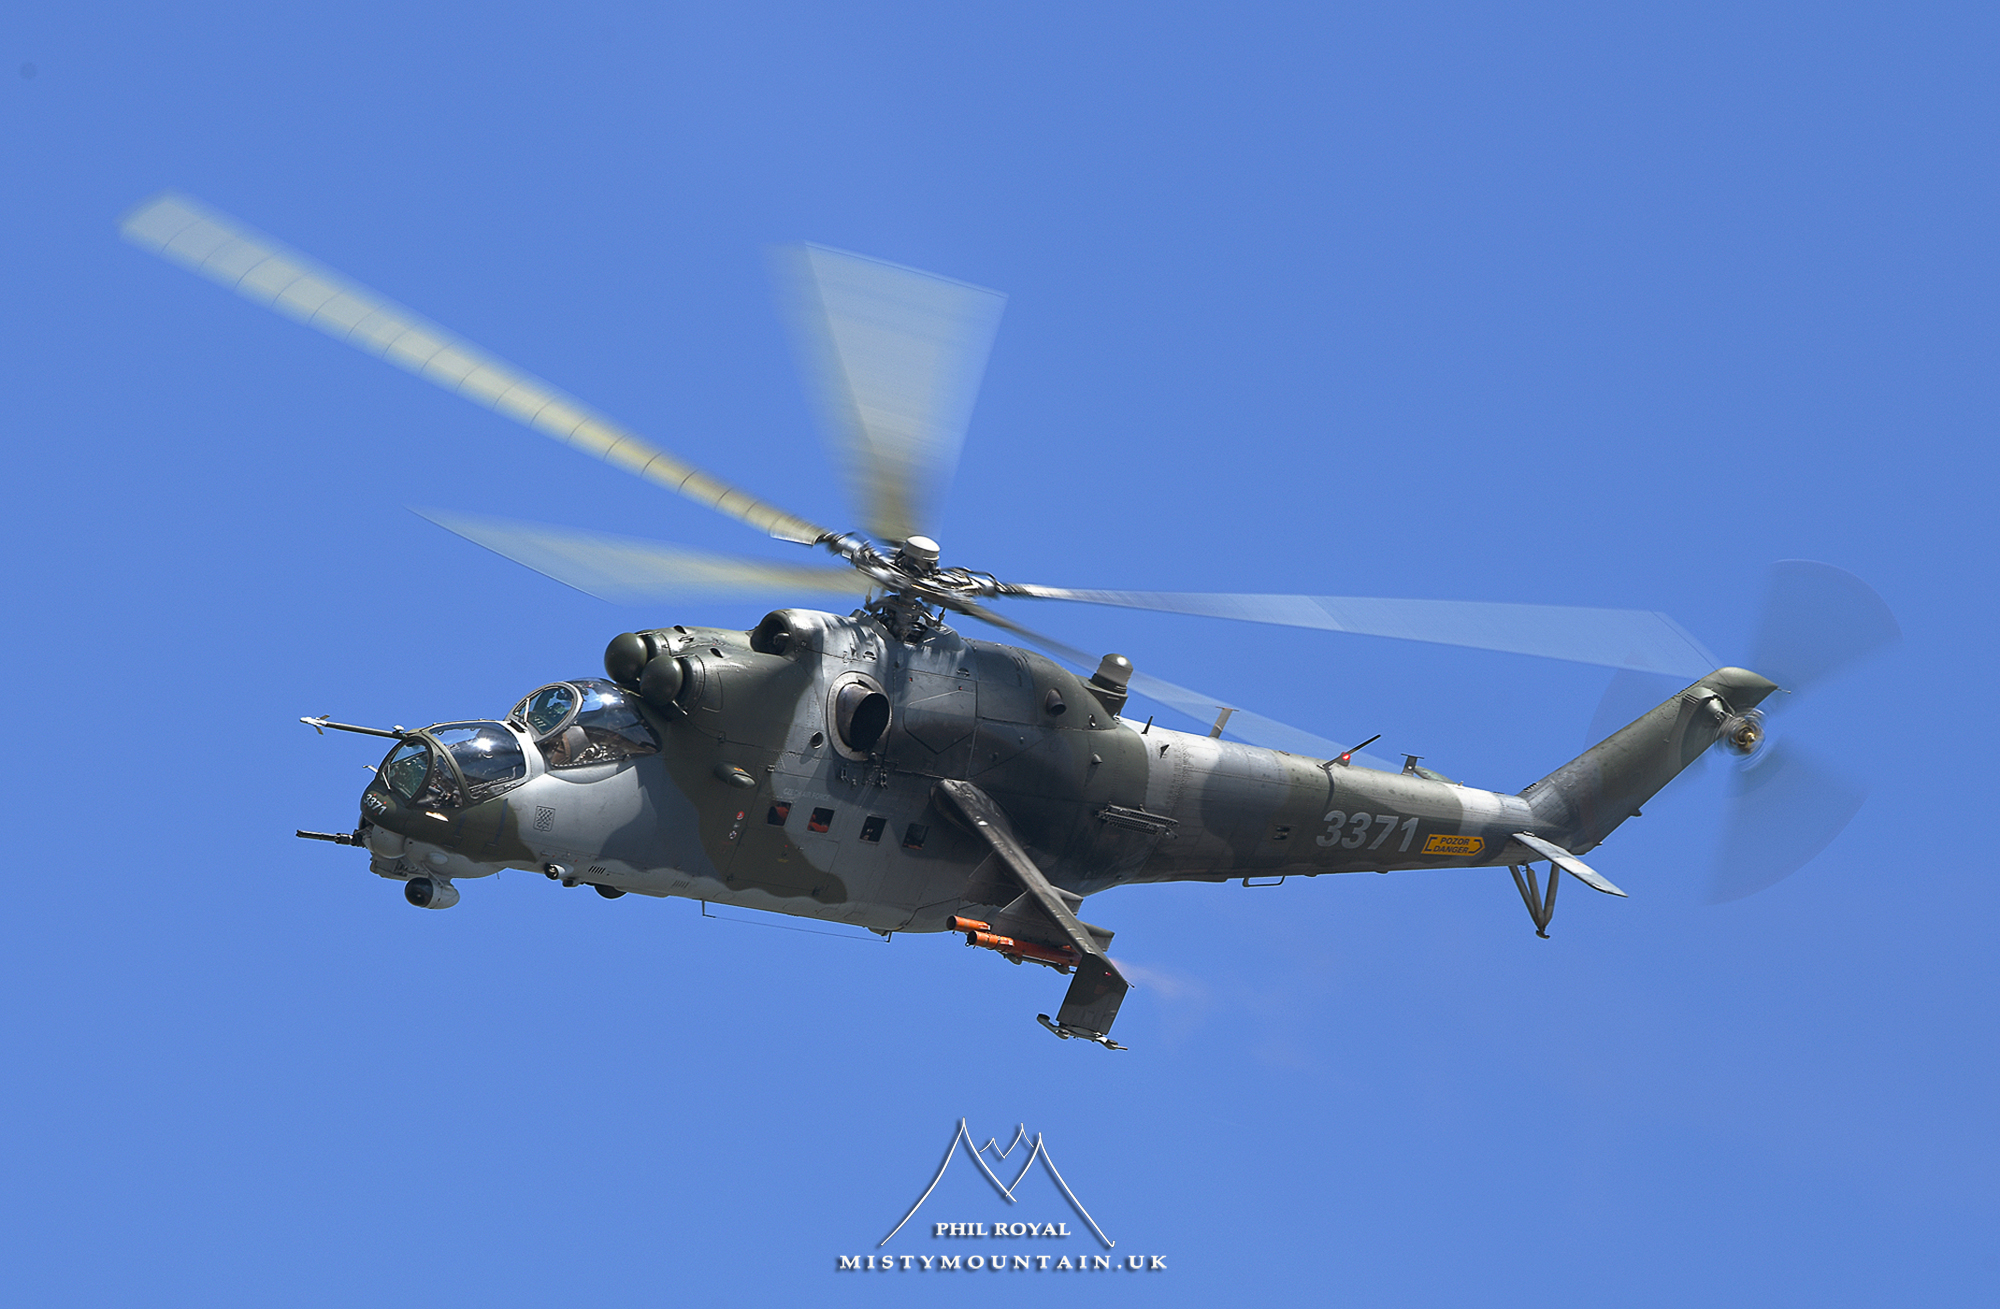 The Mil Mi-24V Hind has an extremely distinctive shape.